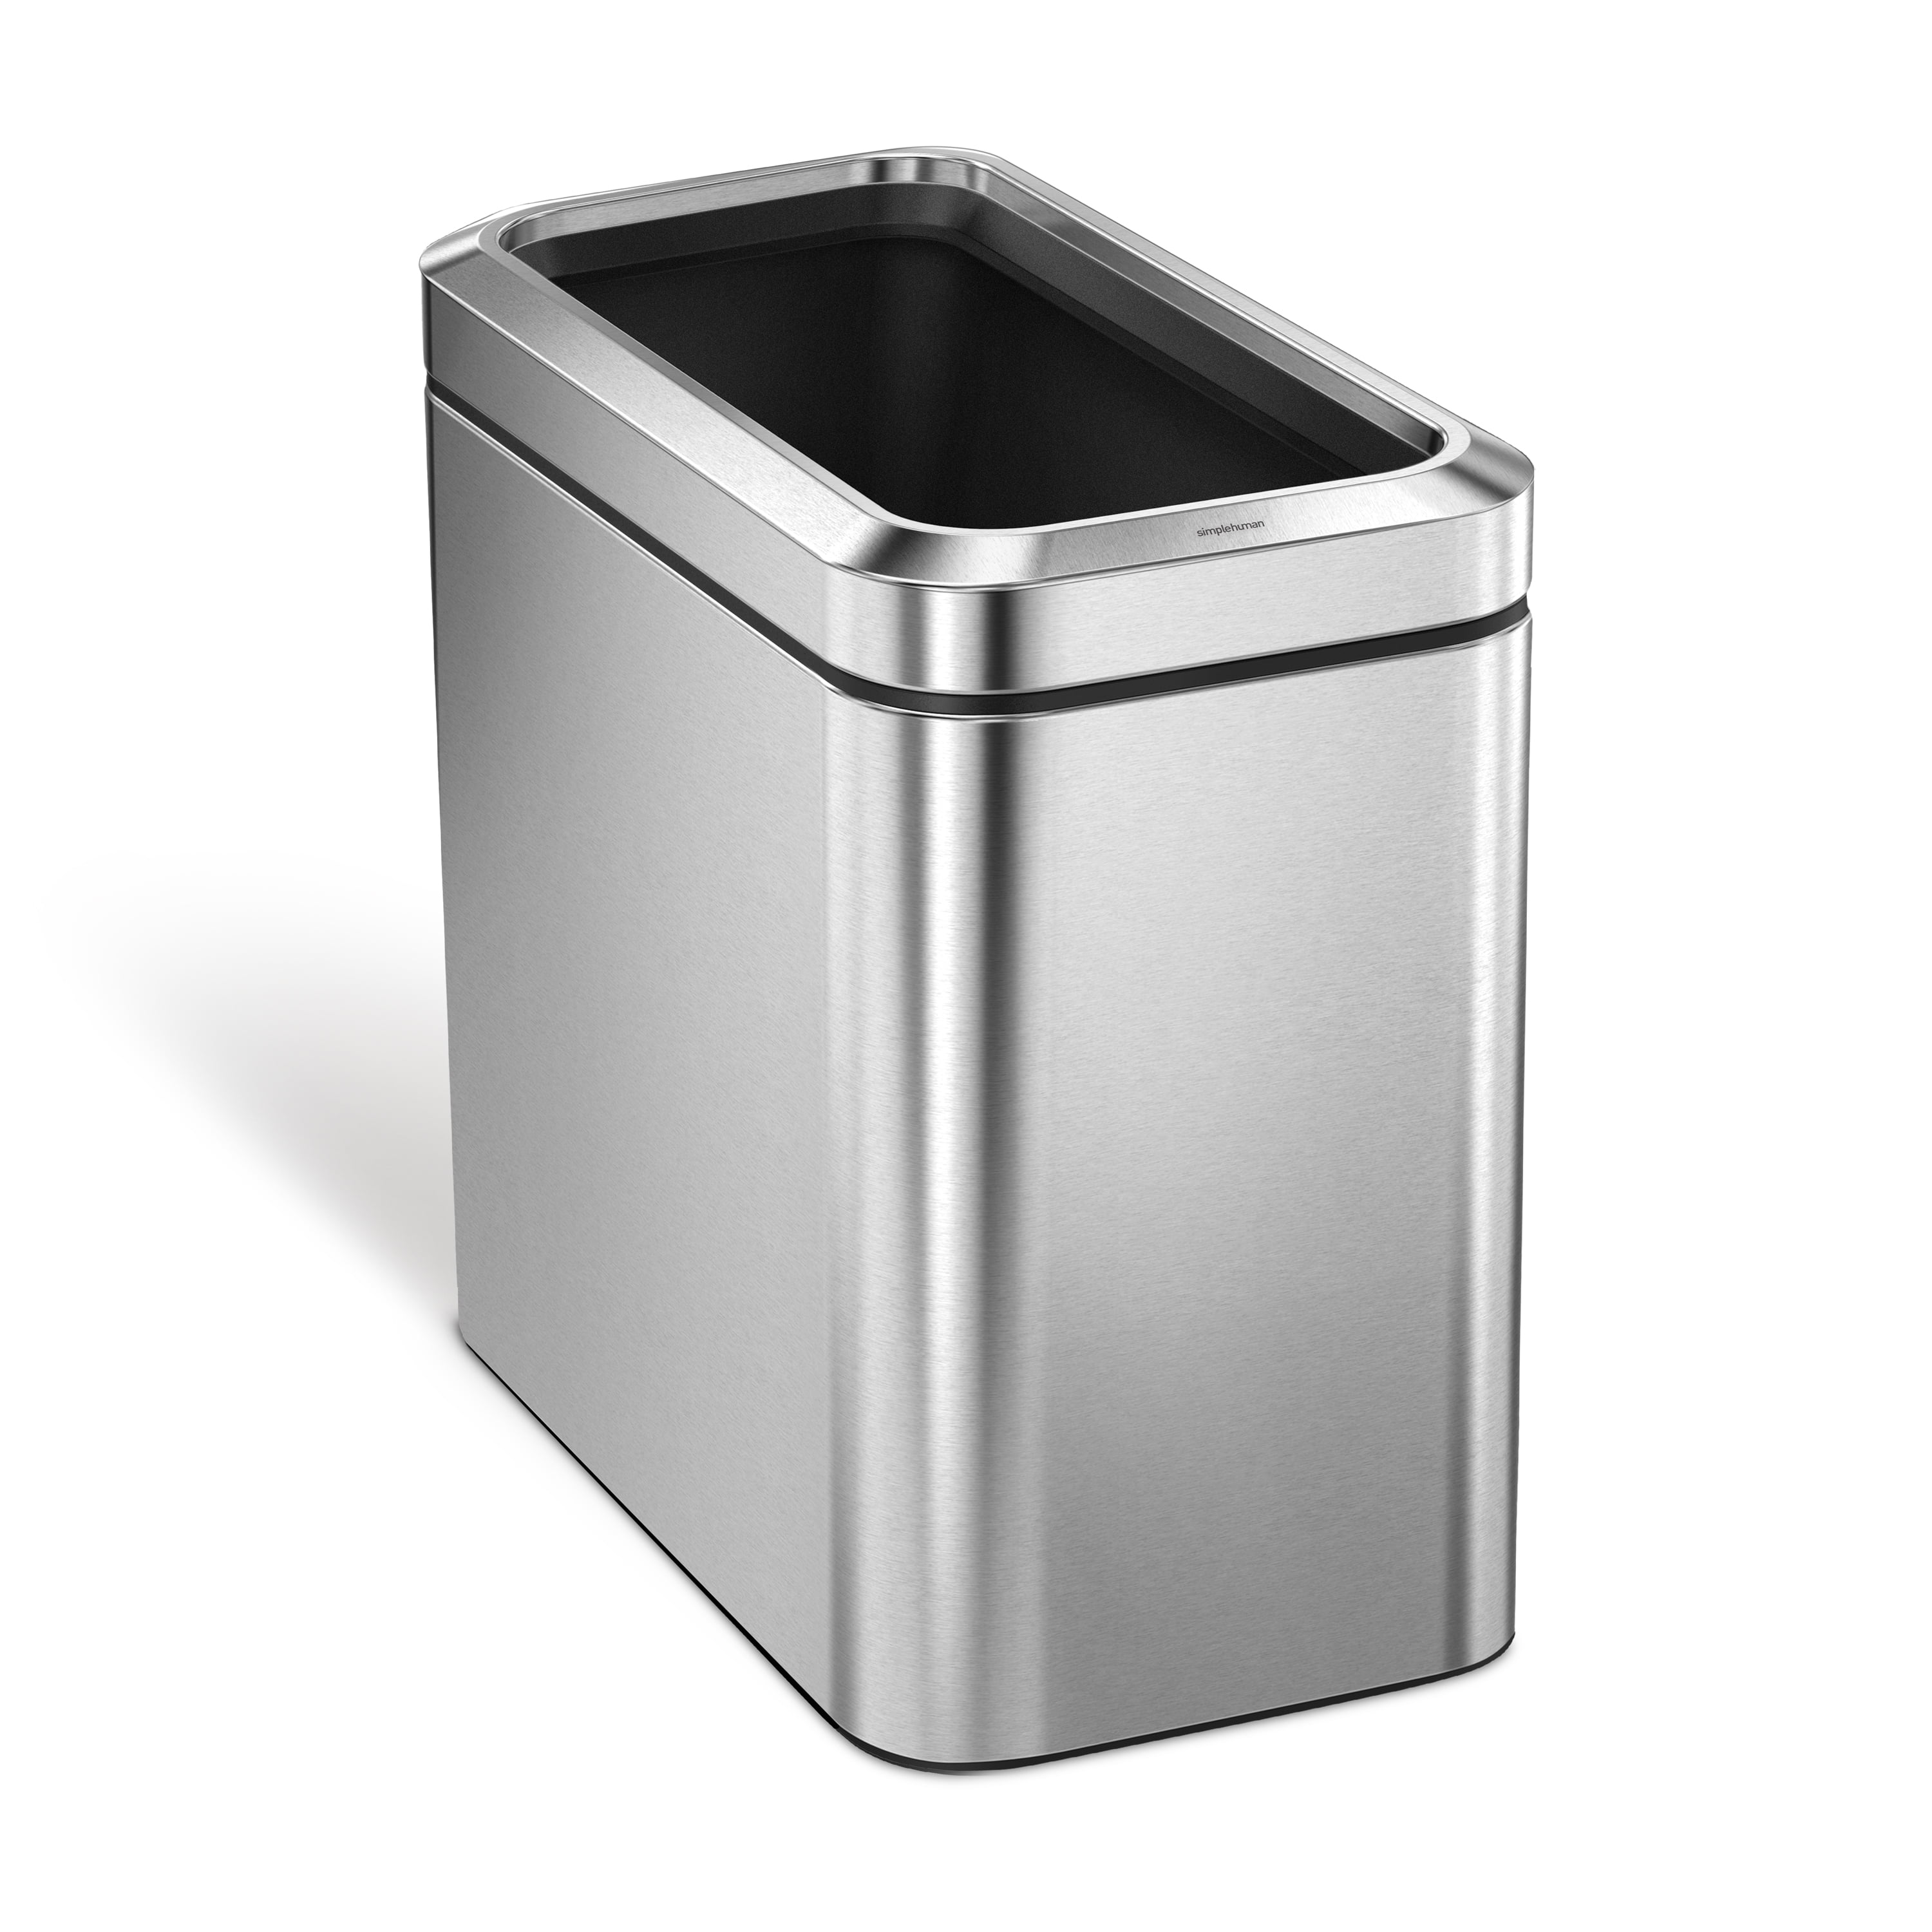 25 Gallon Powder Coated Steel Trash Can with Open Top Portable, 28 lbs.